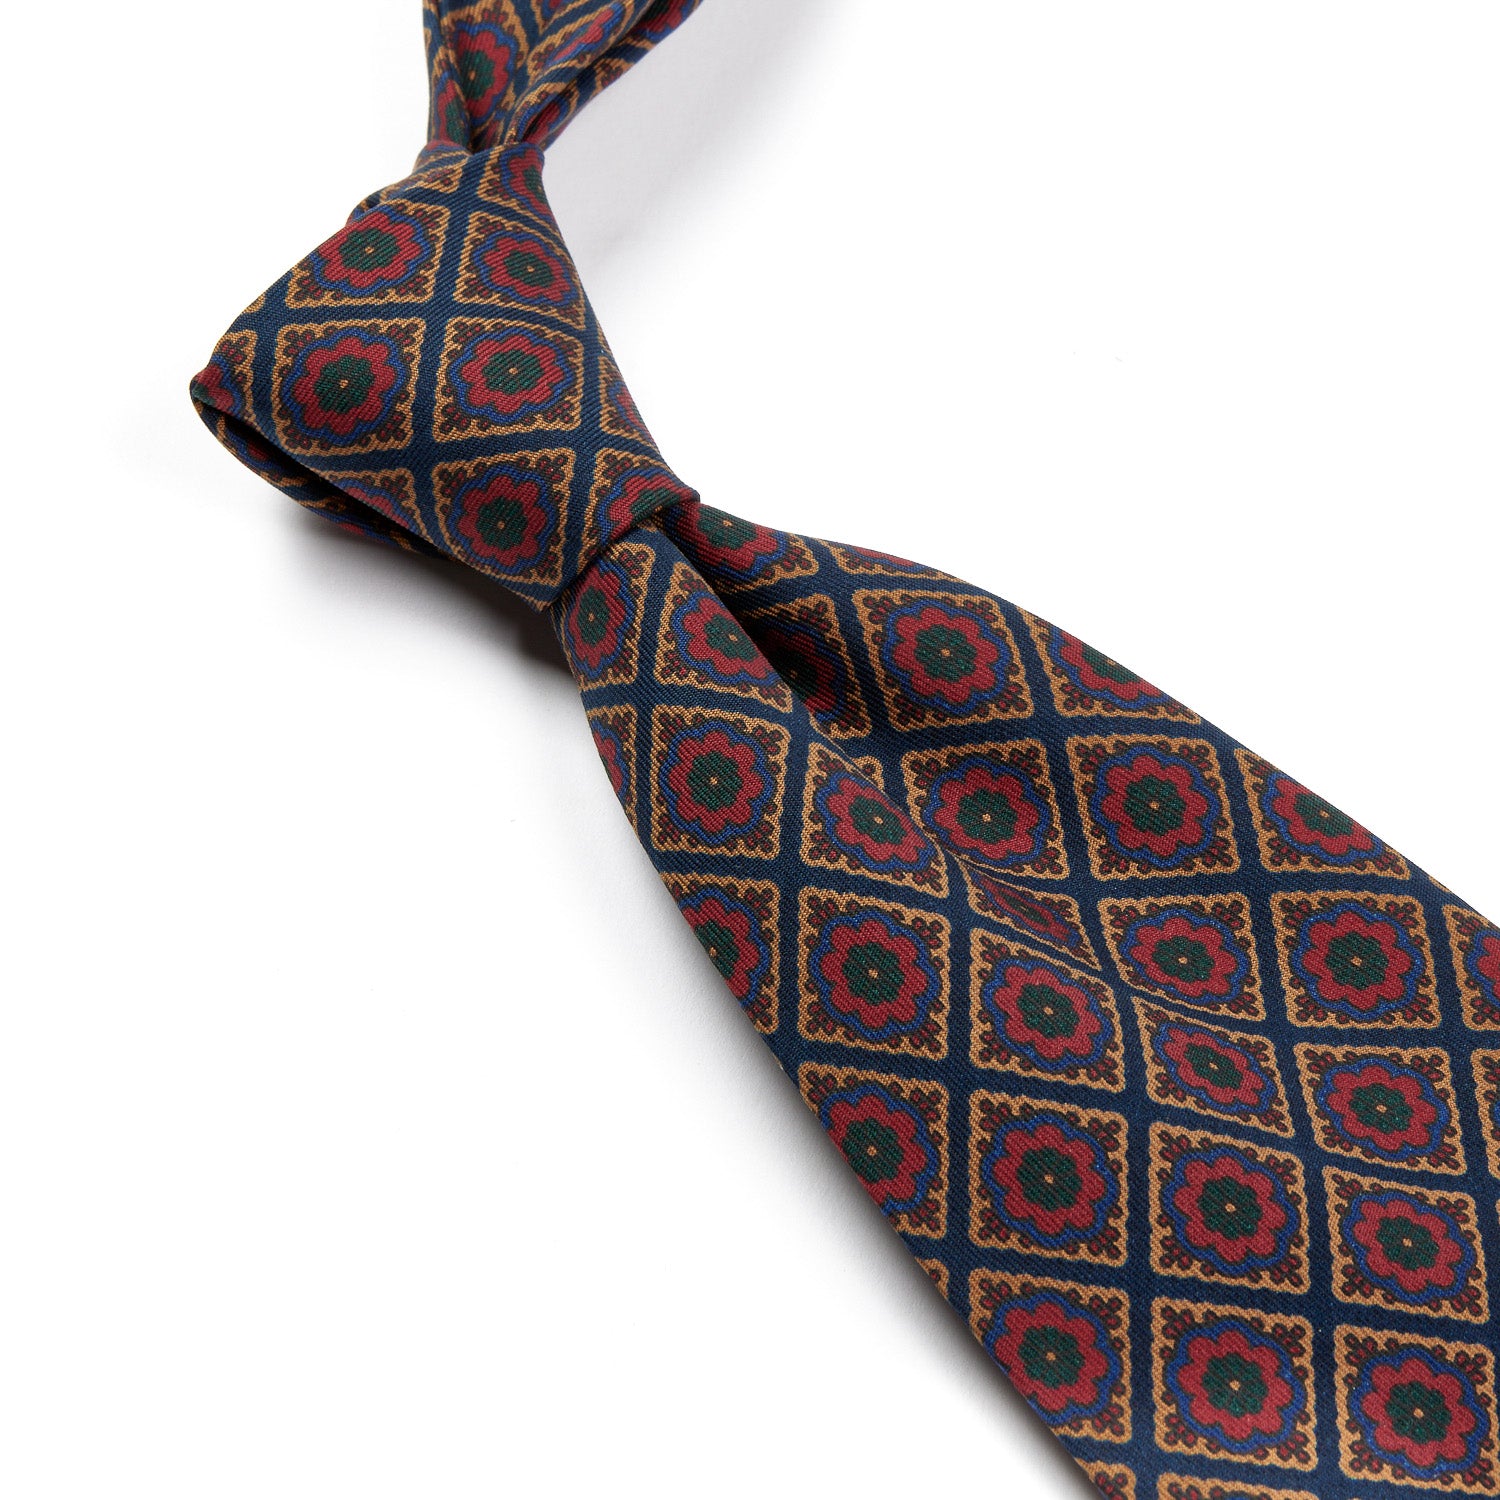 A Sovereign Grade Dark Navy/Red Oversized Medallion Ancient Madder Tie made by KirbyAllison.com with a red, green and blue pattern made of 100% English silk.